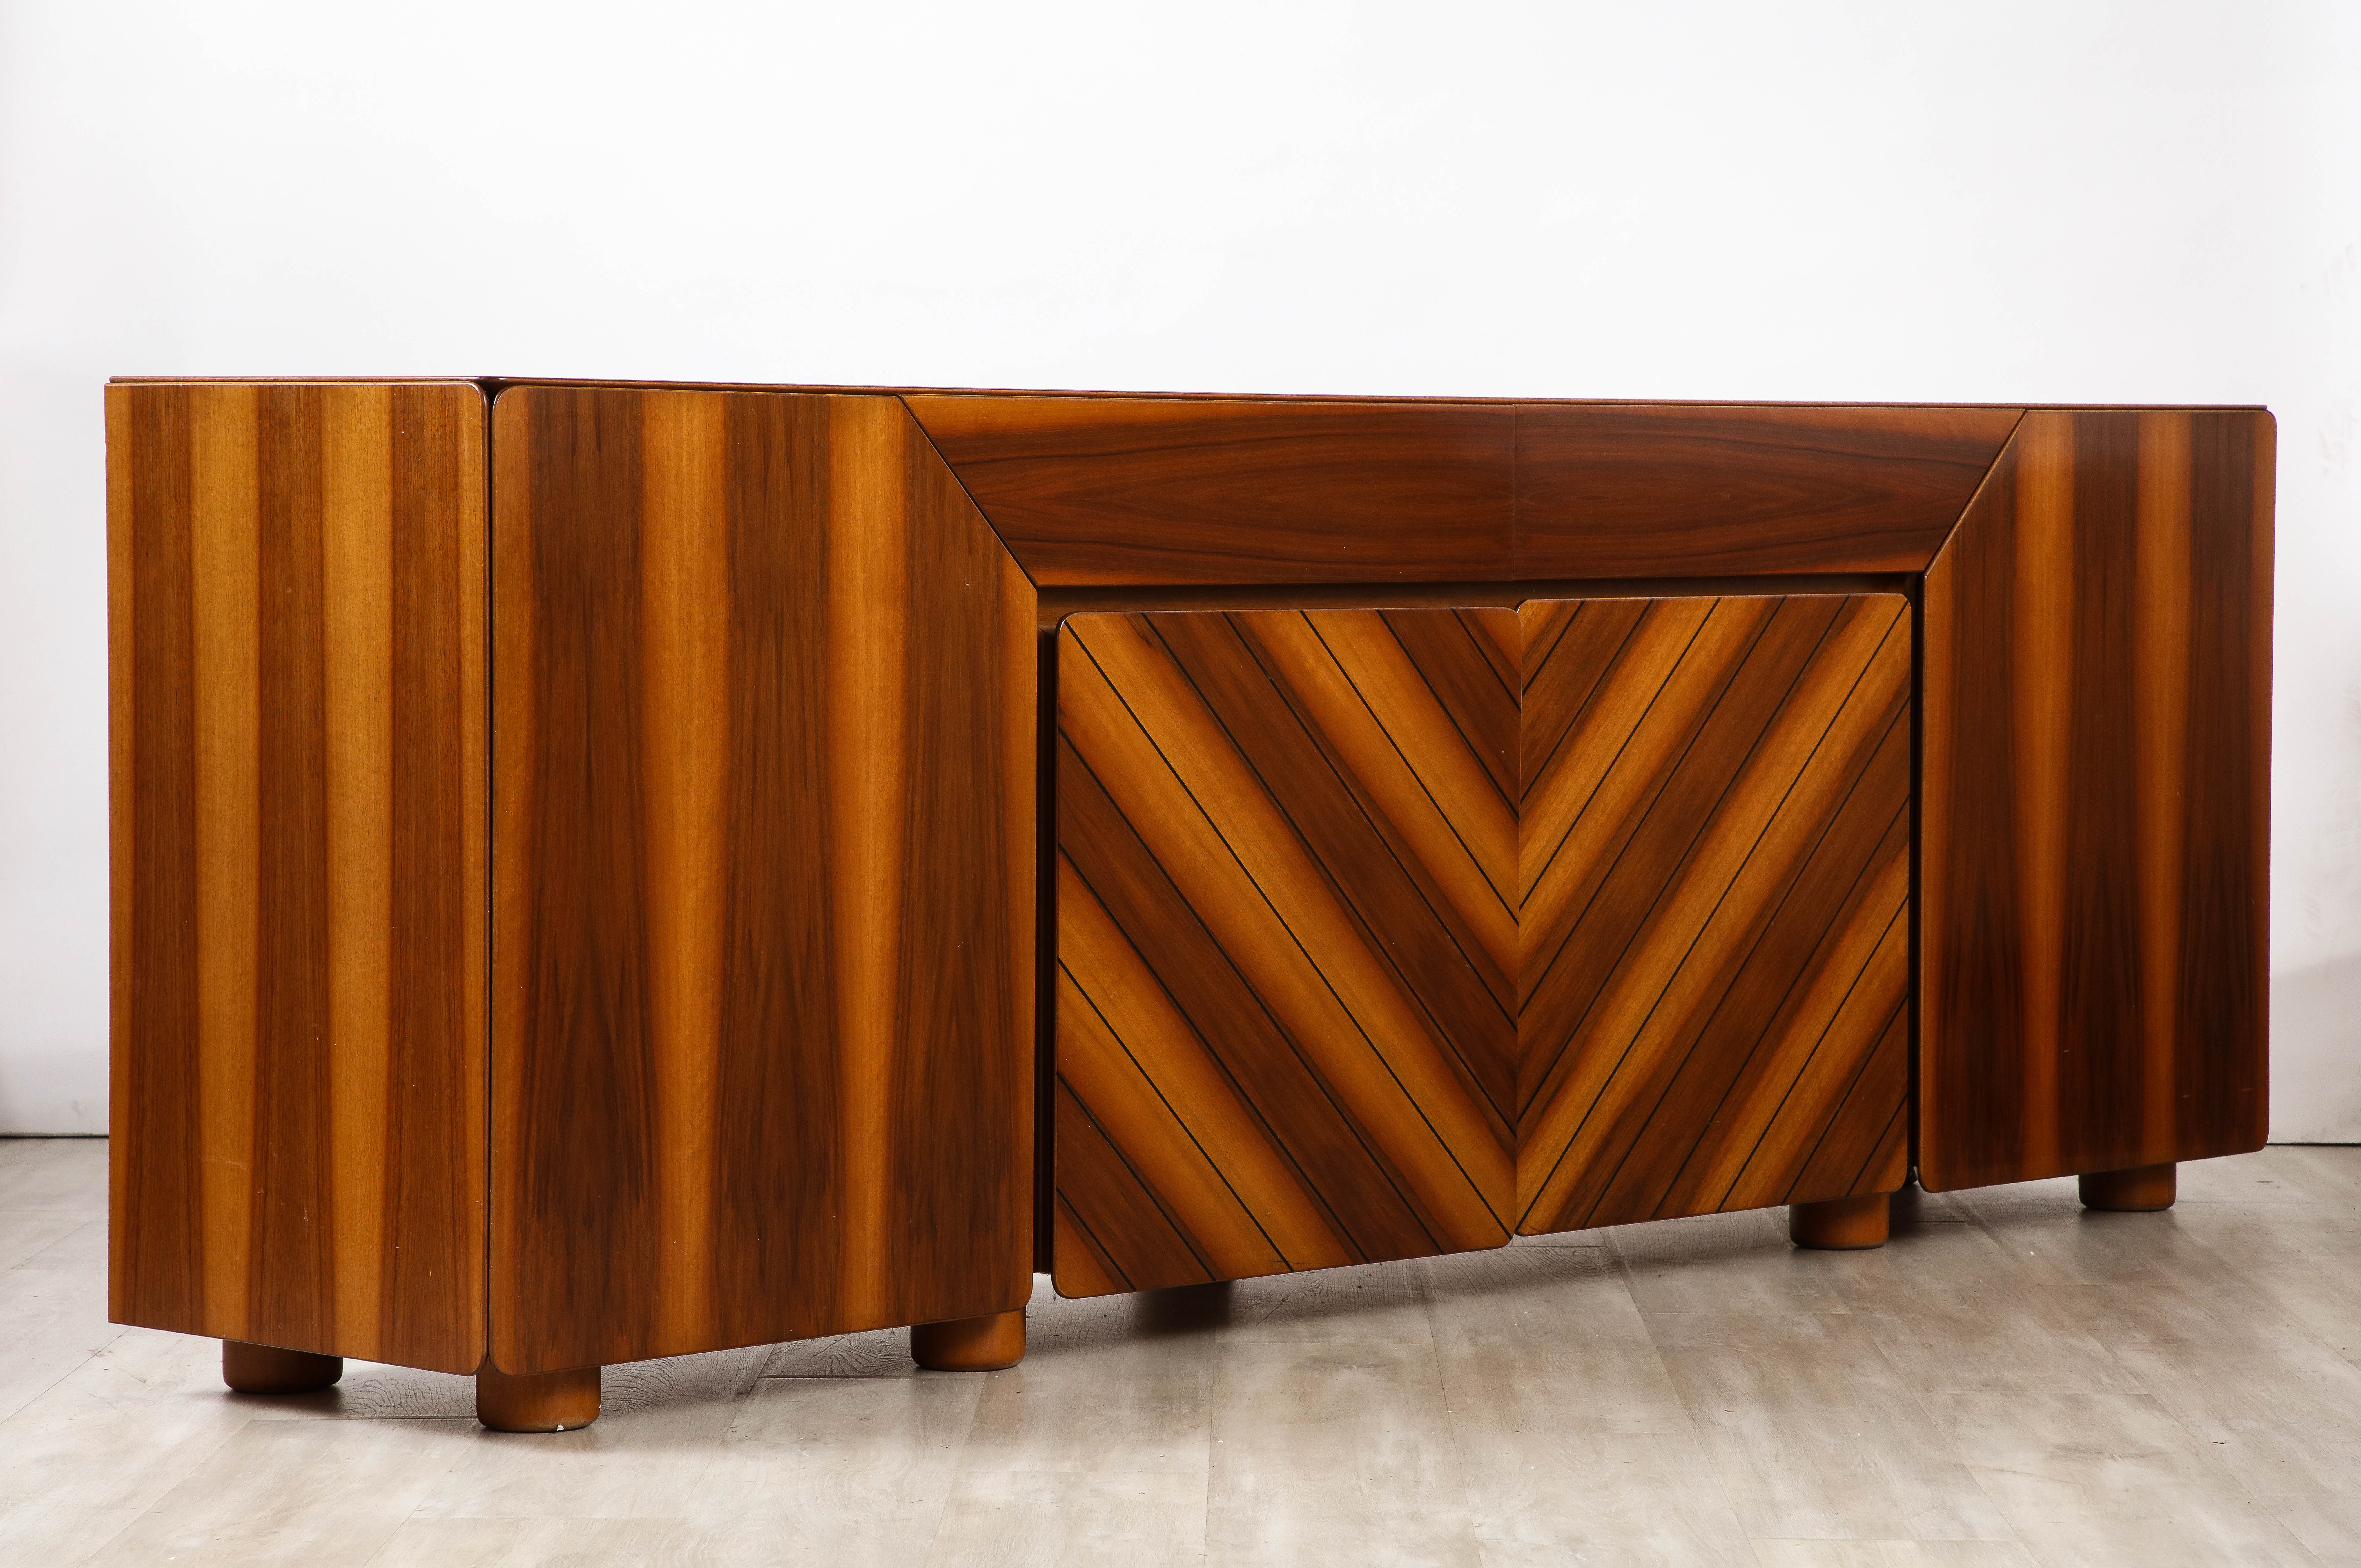 An exquisite Italian 1970's  walnut and satinwood credenza featuring stunning design variations in the woods to create a magnificent graphic motif.  The mid-section consists of two drawers on top of two doors with interior shelving; the outside